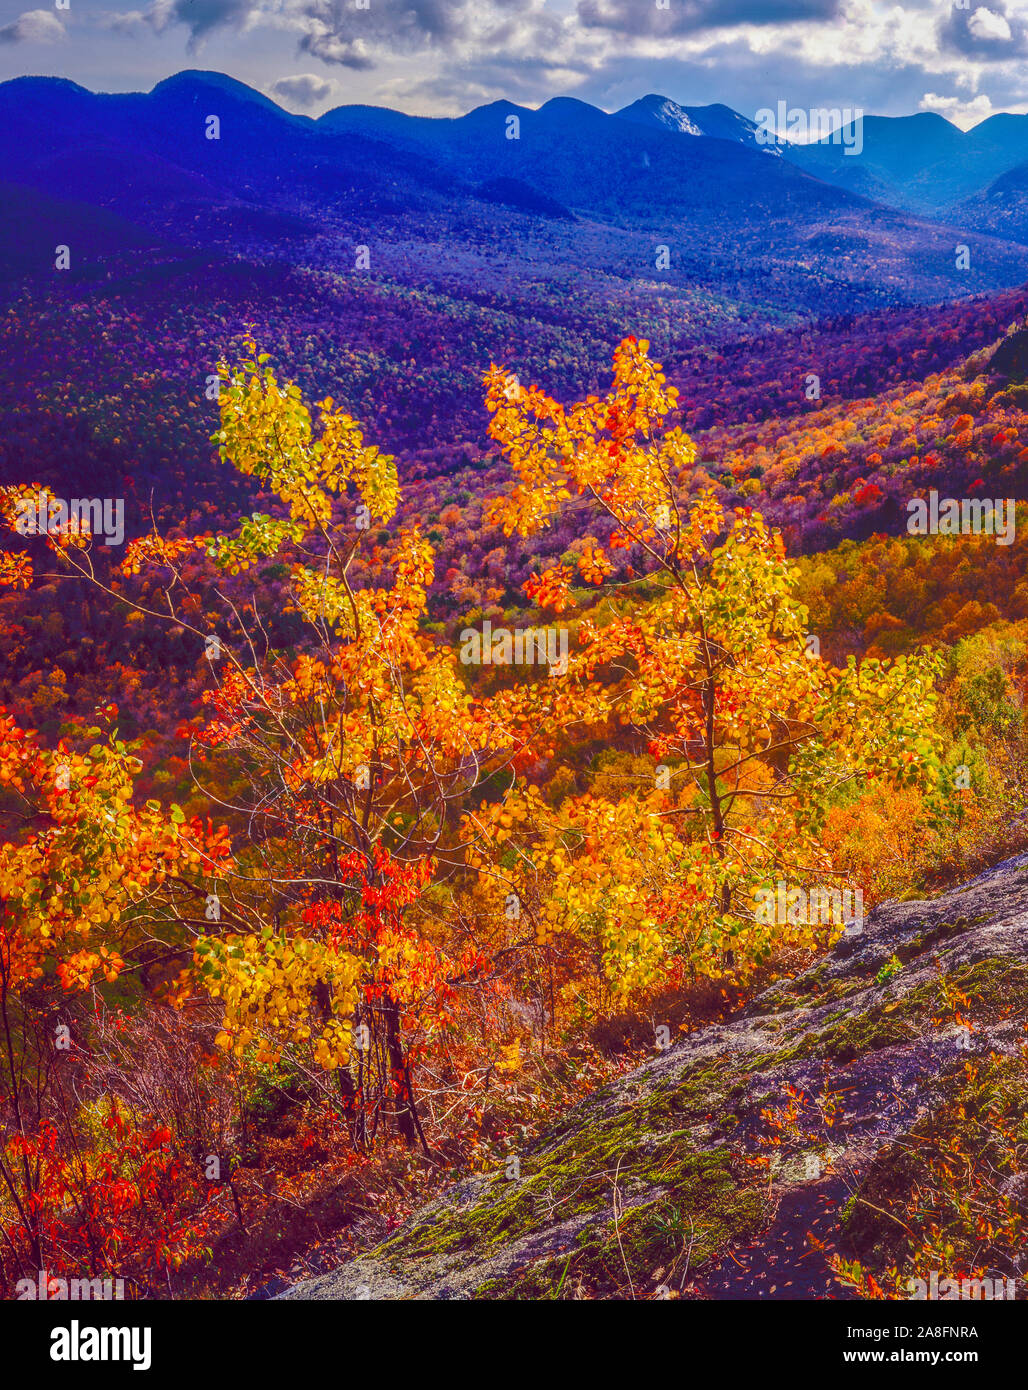 HIgh Peaks and fall color, Adirondack Mountain Park, New York Stock Photo